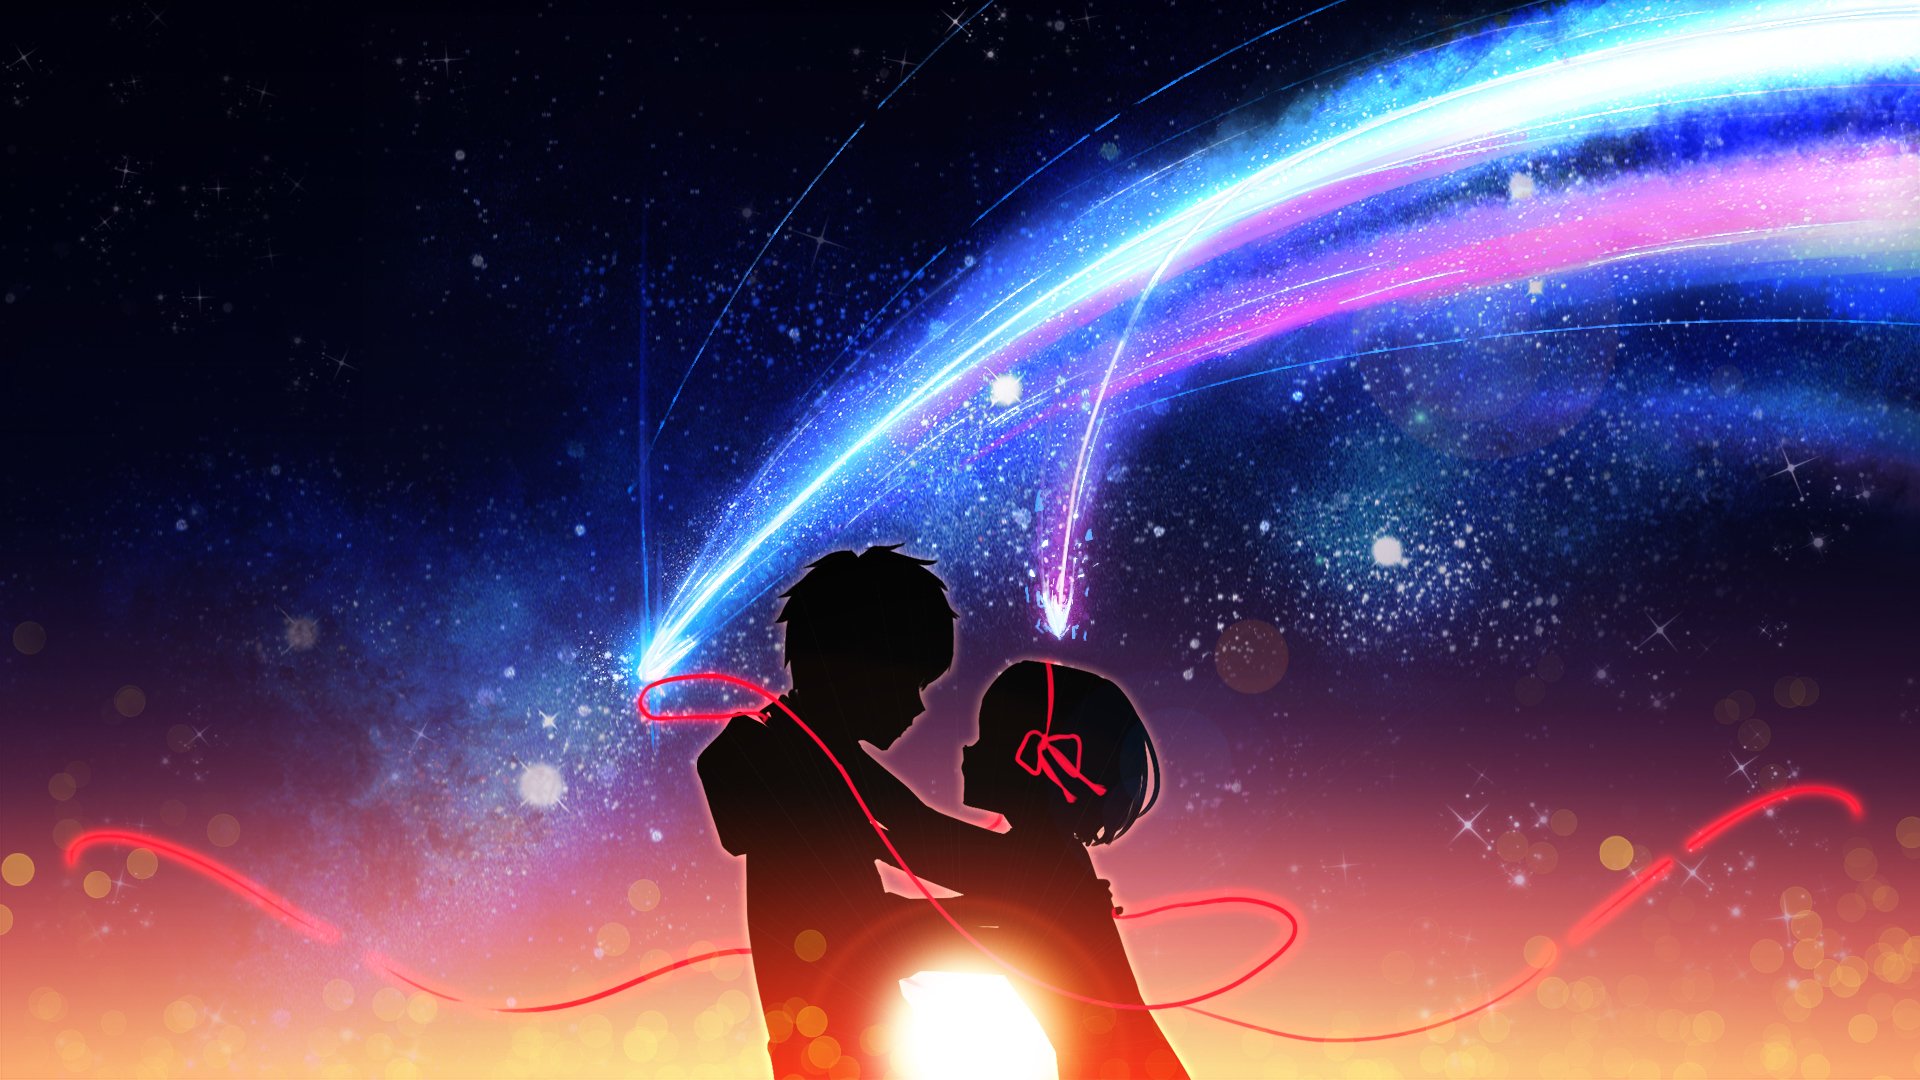 your name anime wallpaper,sky,light,space,atmosphere,astronomical object